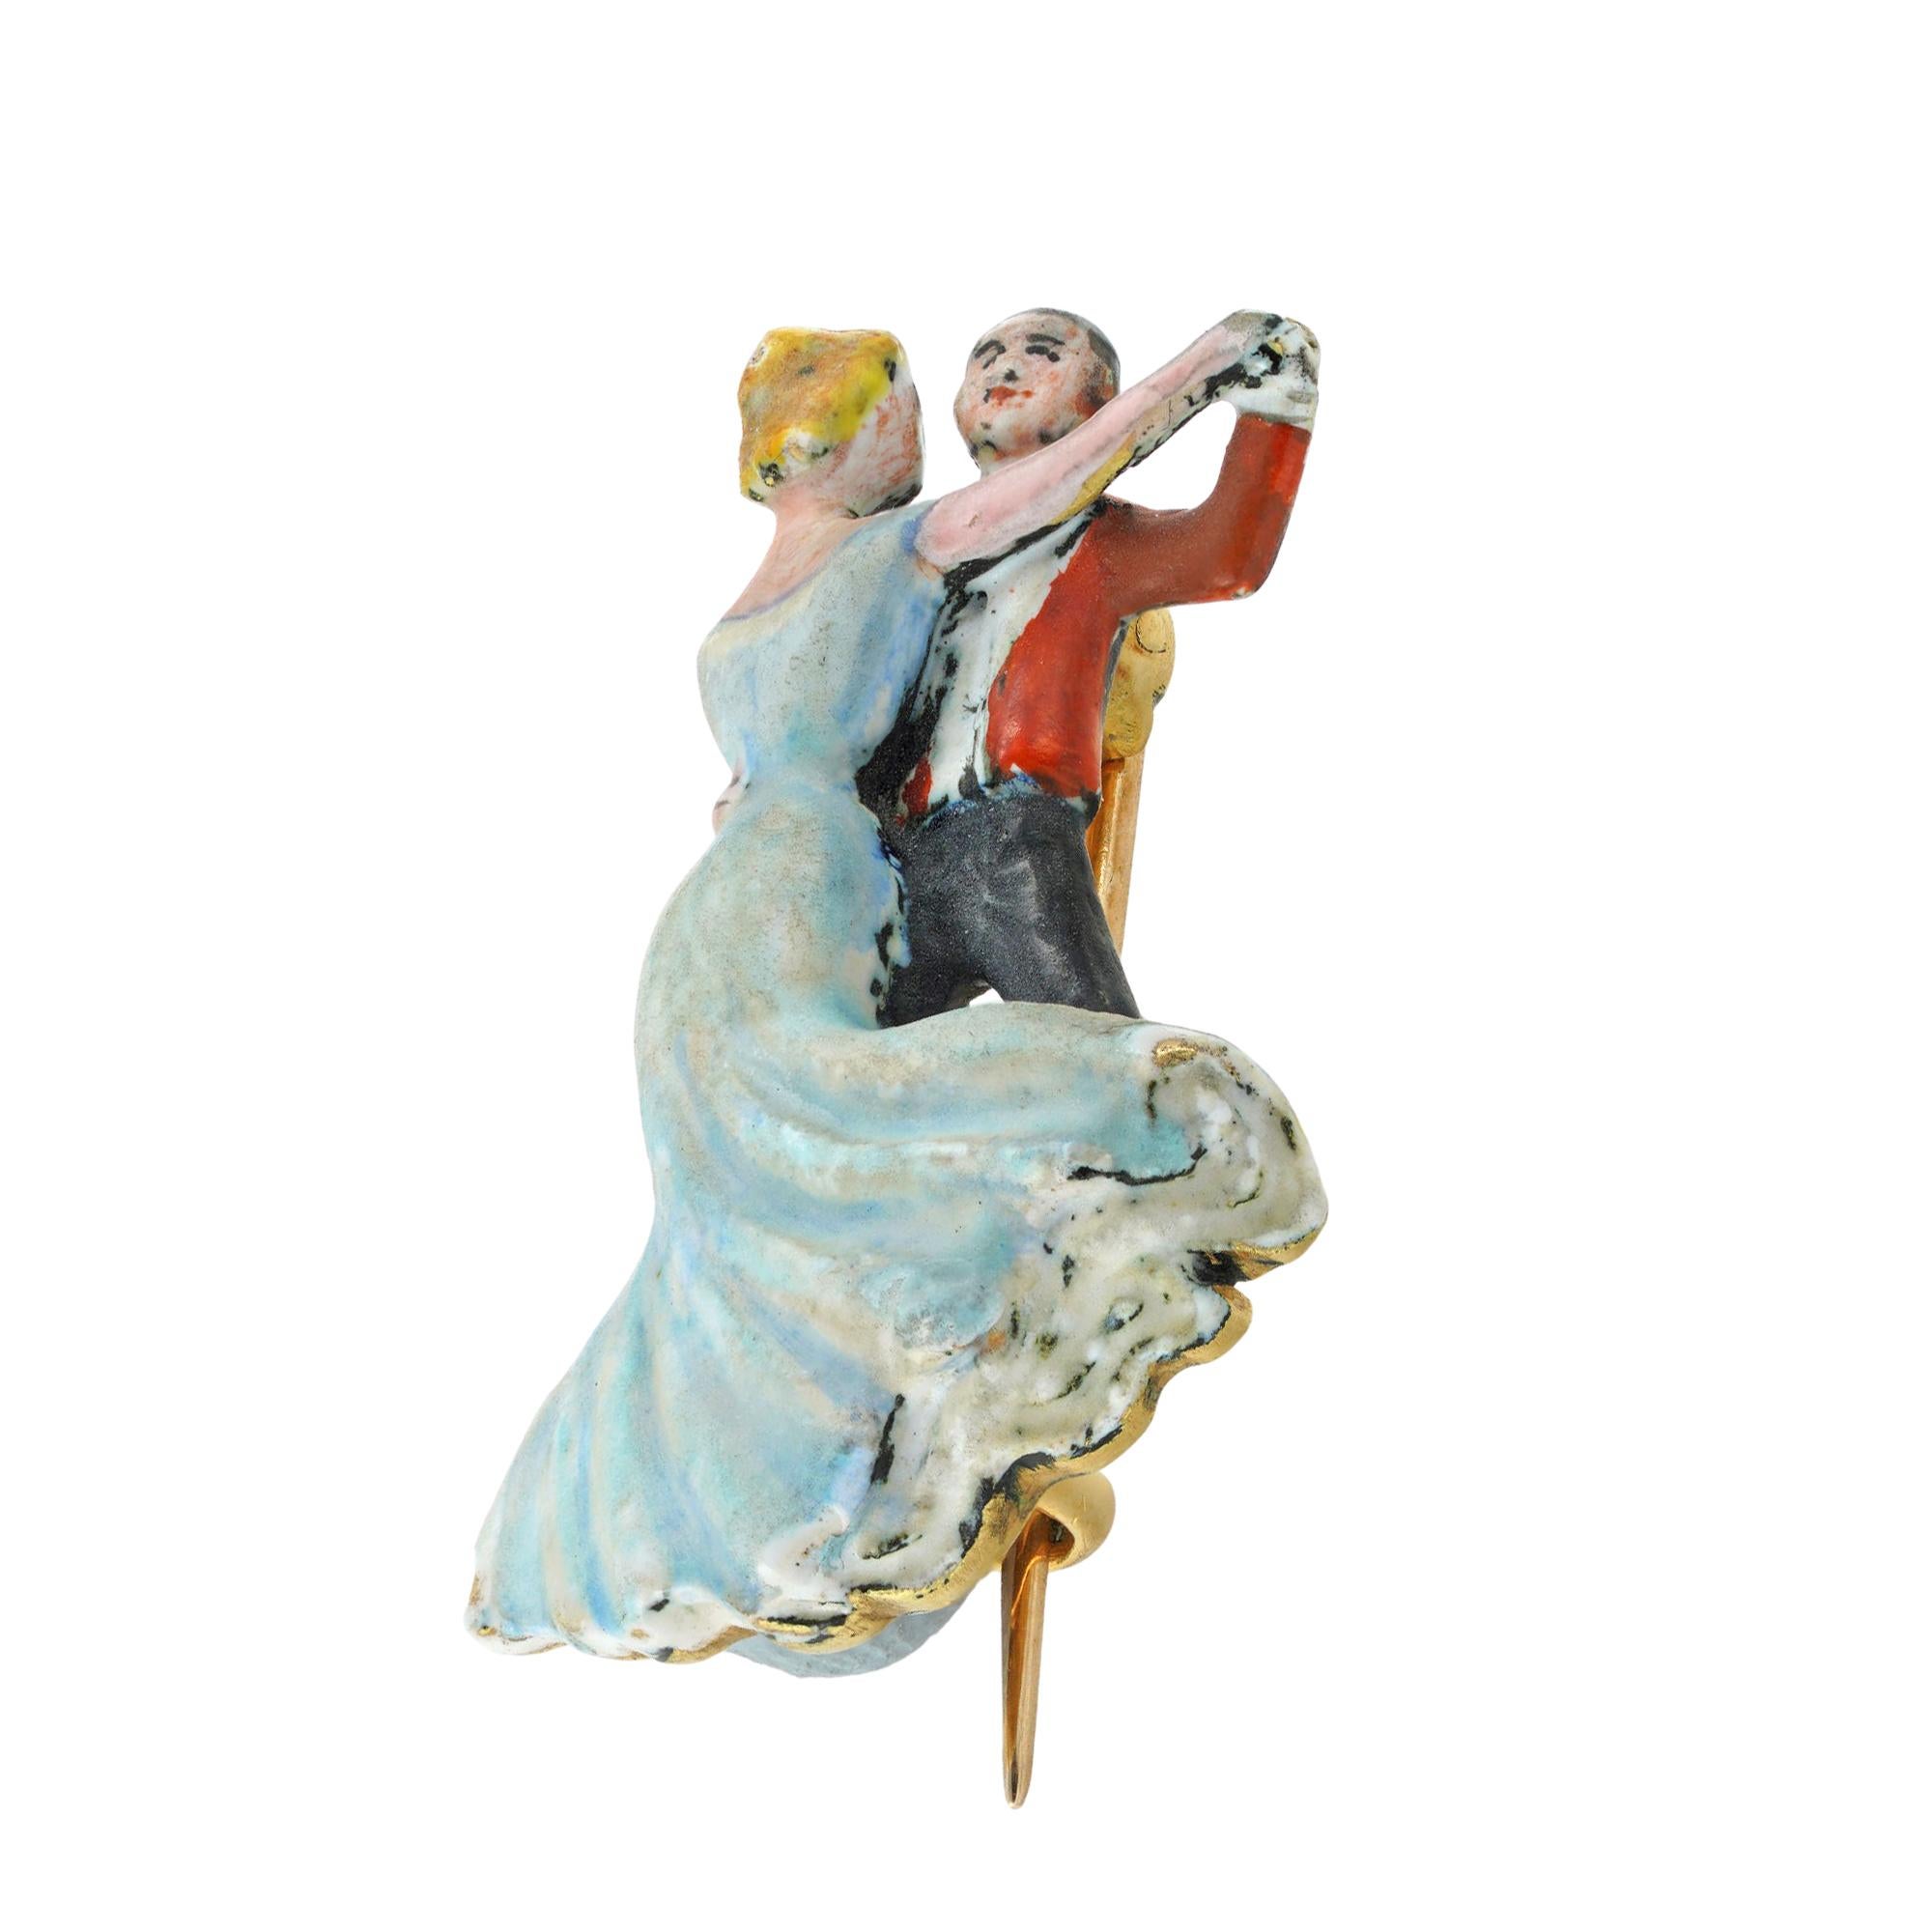 An Edwardian enamel dancers brooch, the brooch in the form of two dancers, delicately hand-enamelled to a yellow gold mount and brooch fitting, engraved 'Pytchley Ball 1903', measuring approximately 2.5x1.6cm, gross weight 8.7 grams, circa